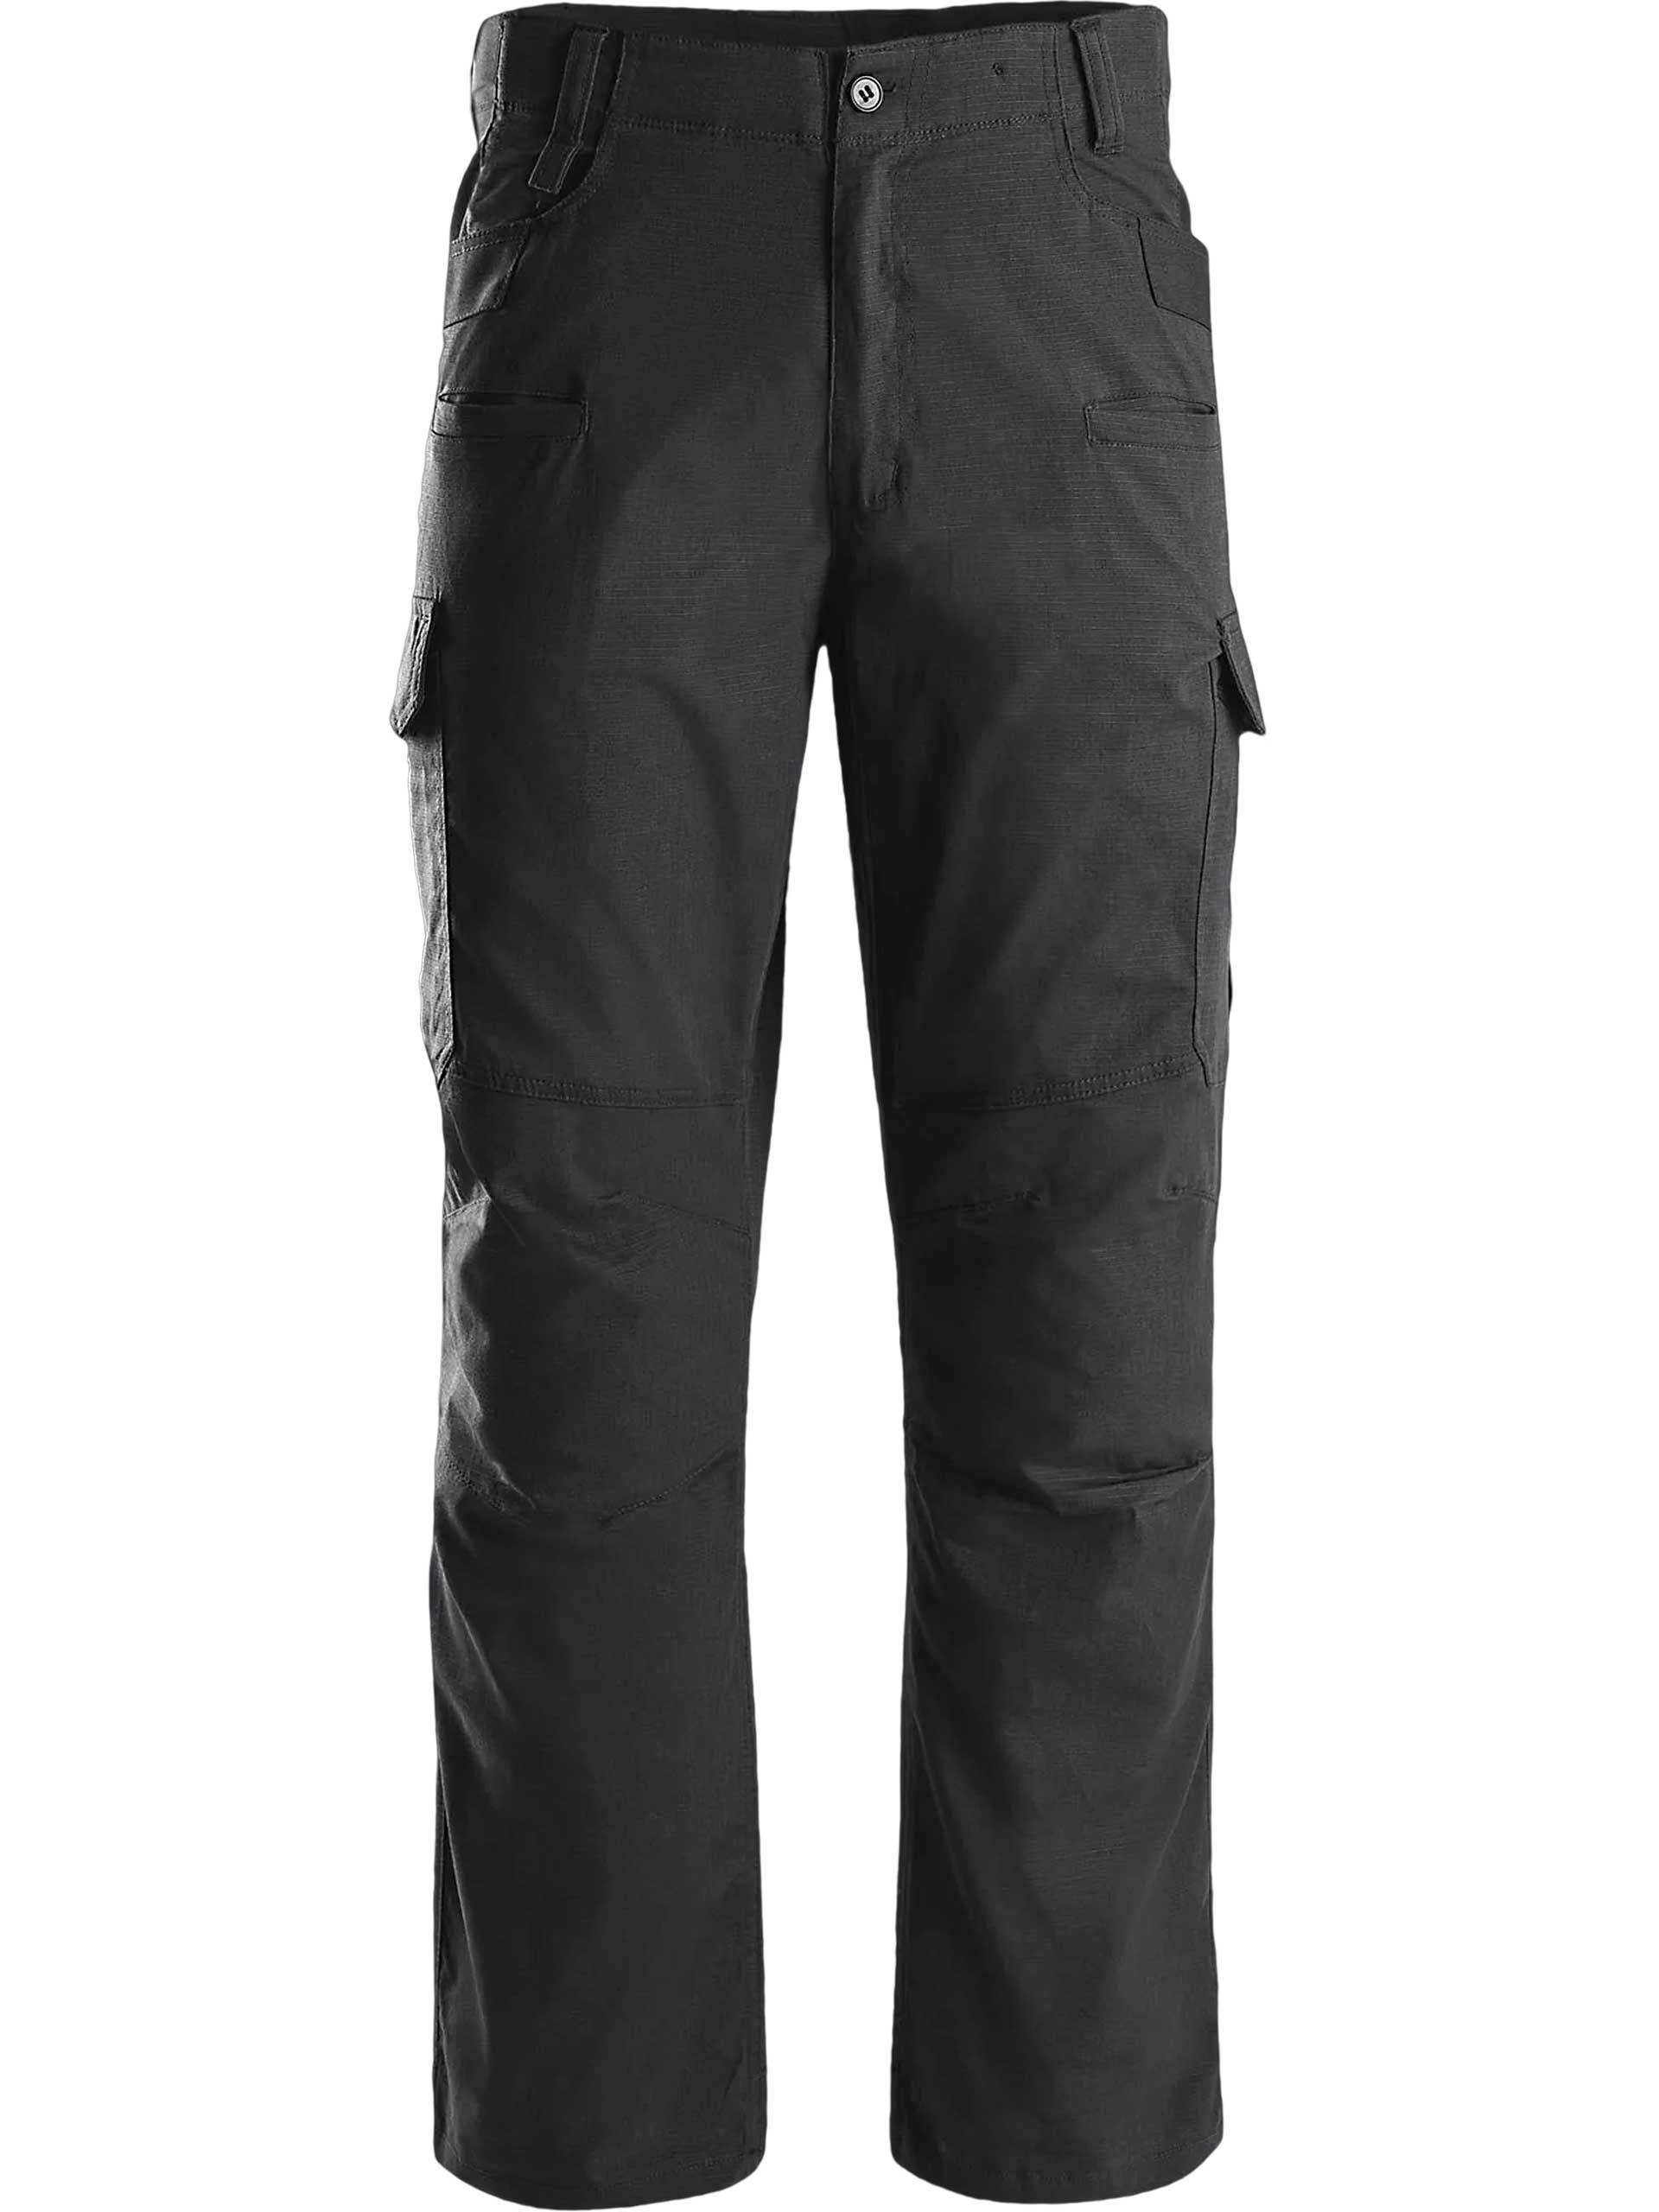 Highlander STOIRM Tactical Trousers Black  Patrol Store